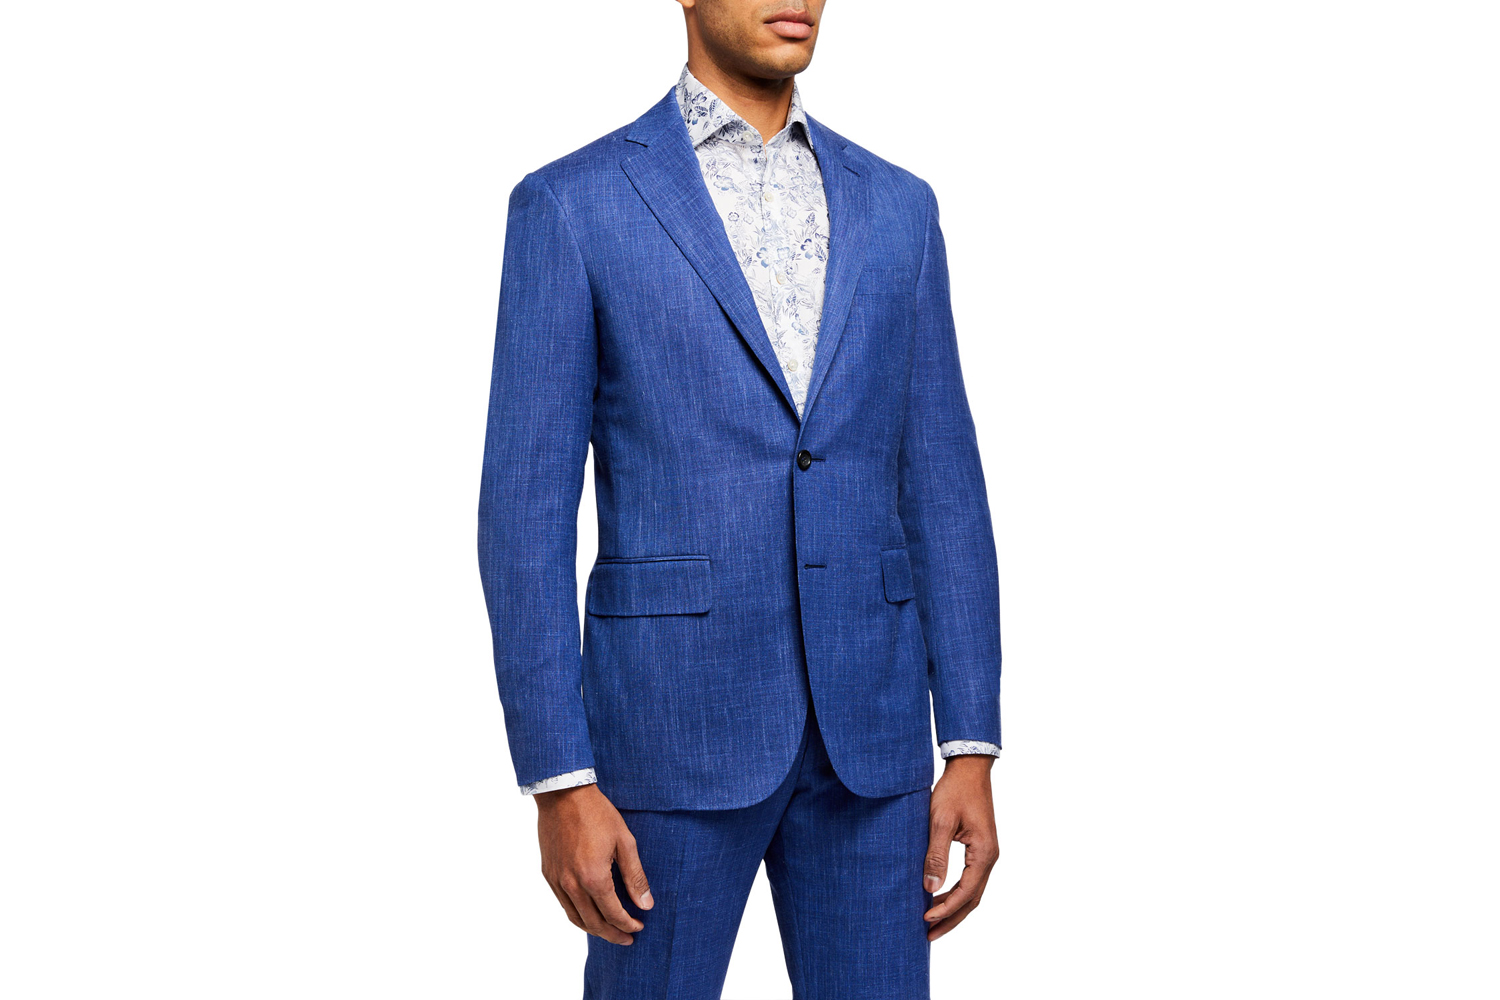 Heathered Two-Piece Suit
Canali